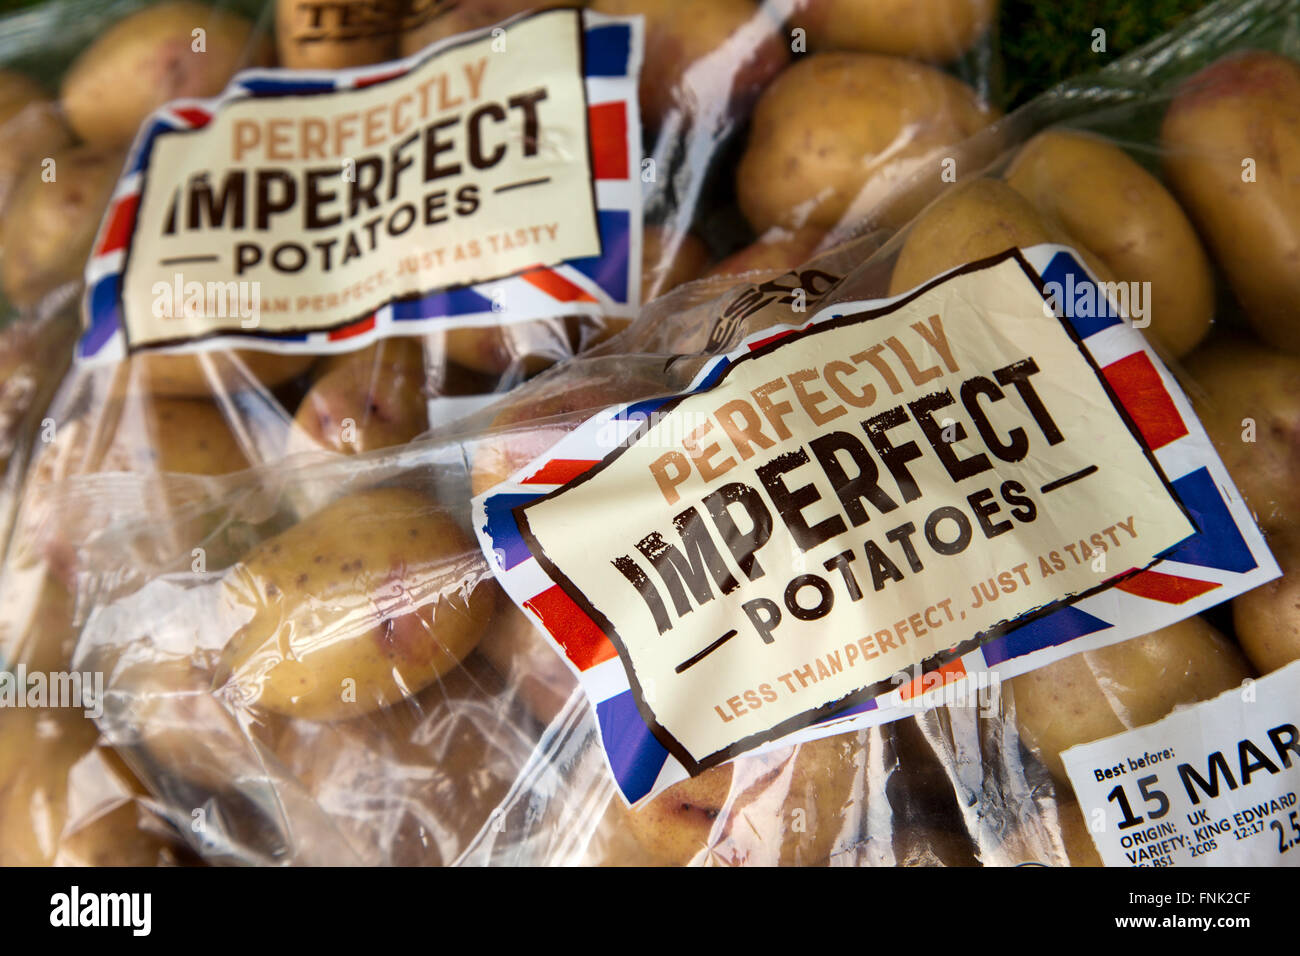 Tesco supermarket perfectly imperfect potatoes sold in the U.K. Stock Photo